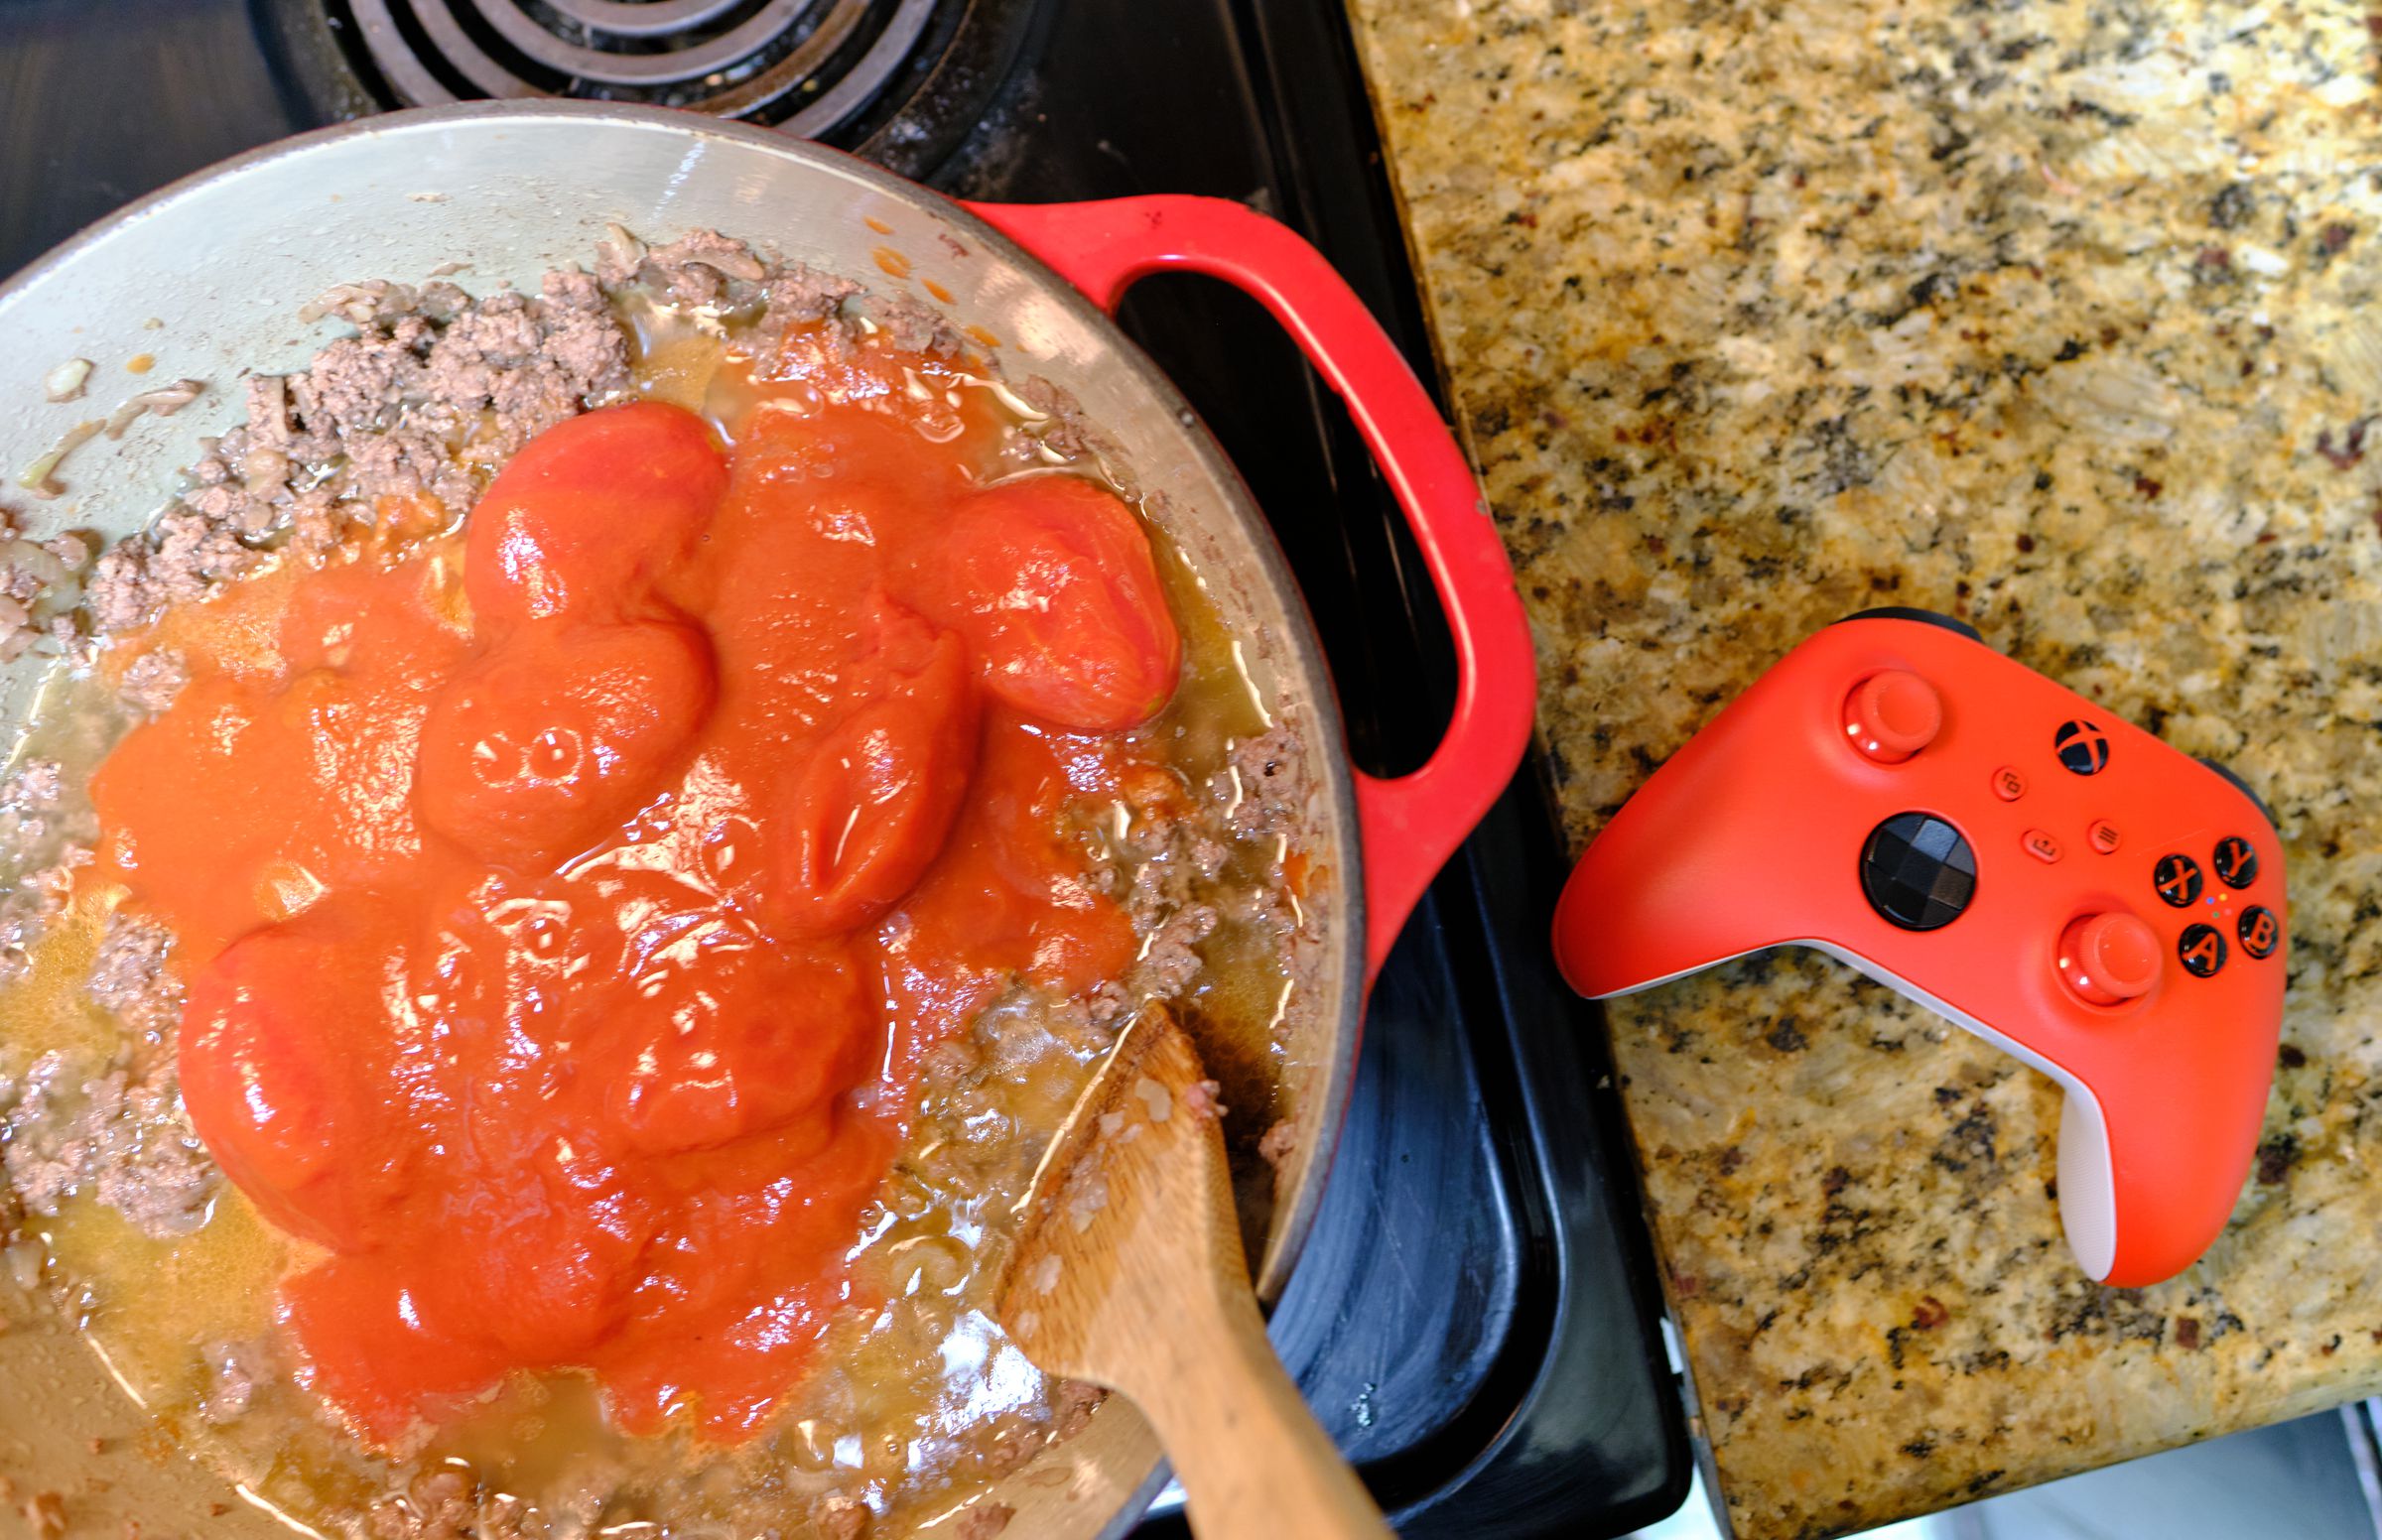 I can’t say the chili smelled great as it was cooking. The color coordination I had going on between the tomatoes, pot, and controller was on-point though.